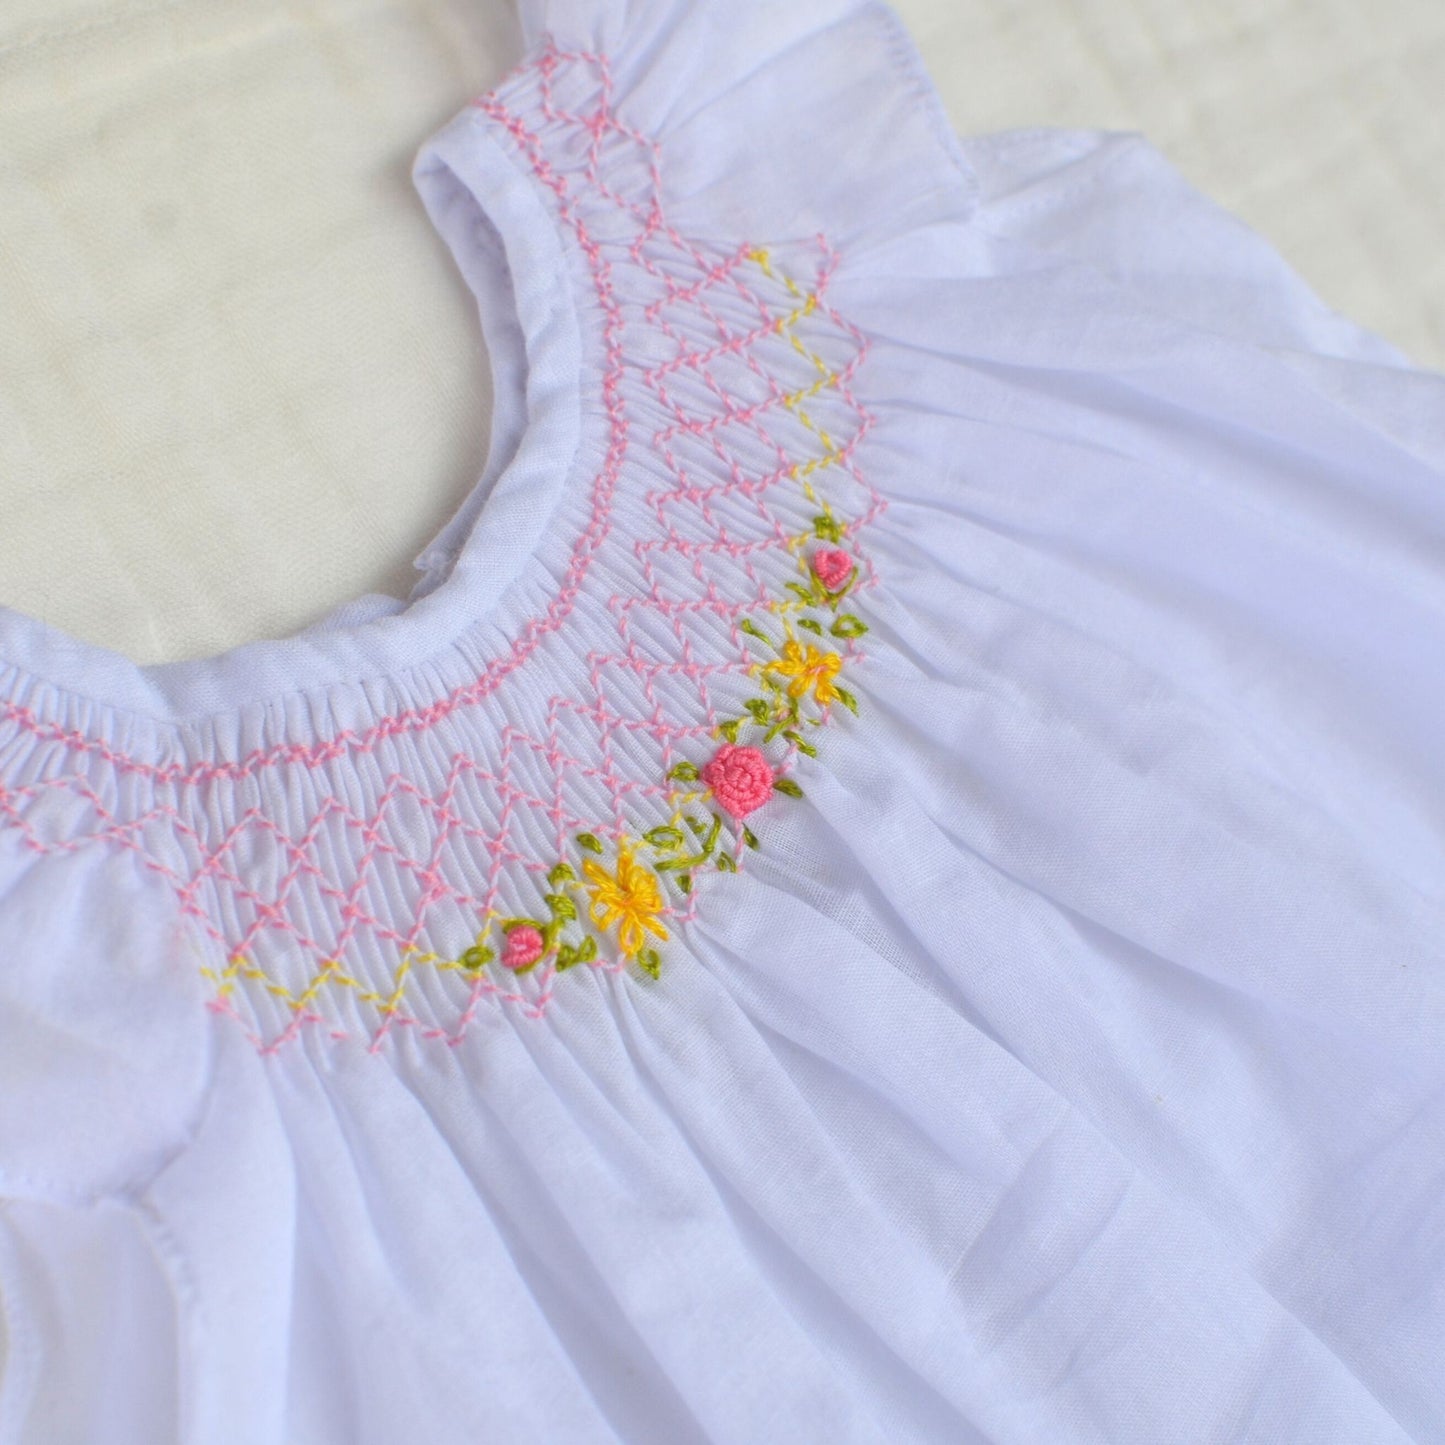 Handmade Smocked Dress Collection - 3 to 6 months